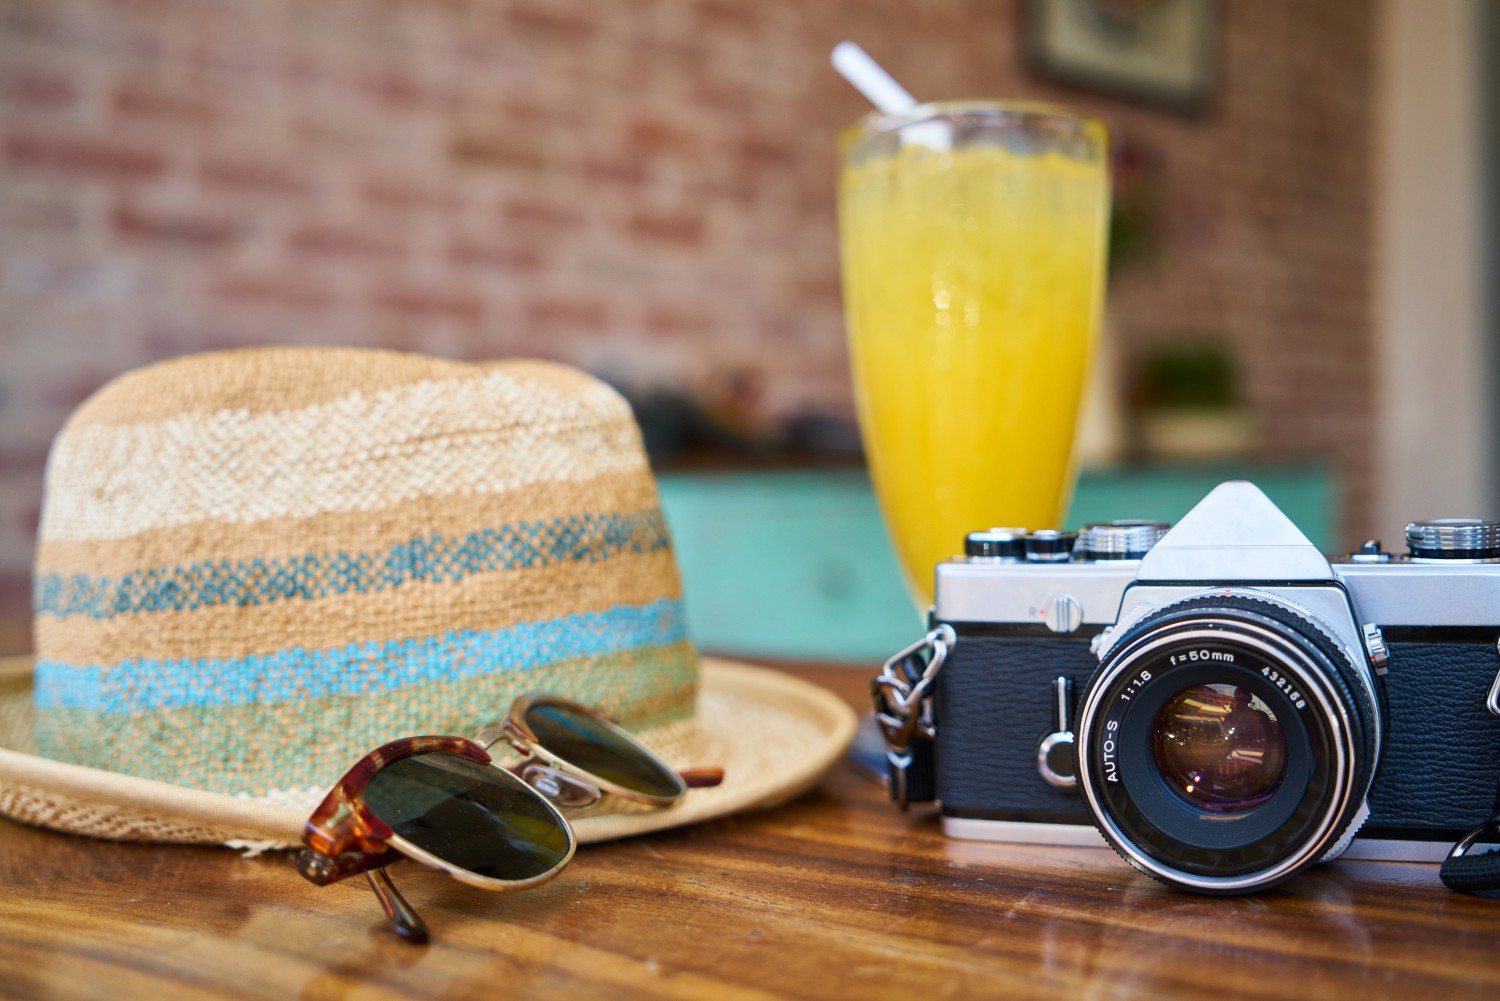 A hat, sunglasses, a glass of juice, and a camera on a table